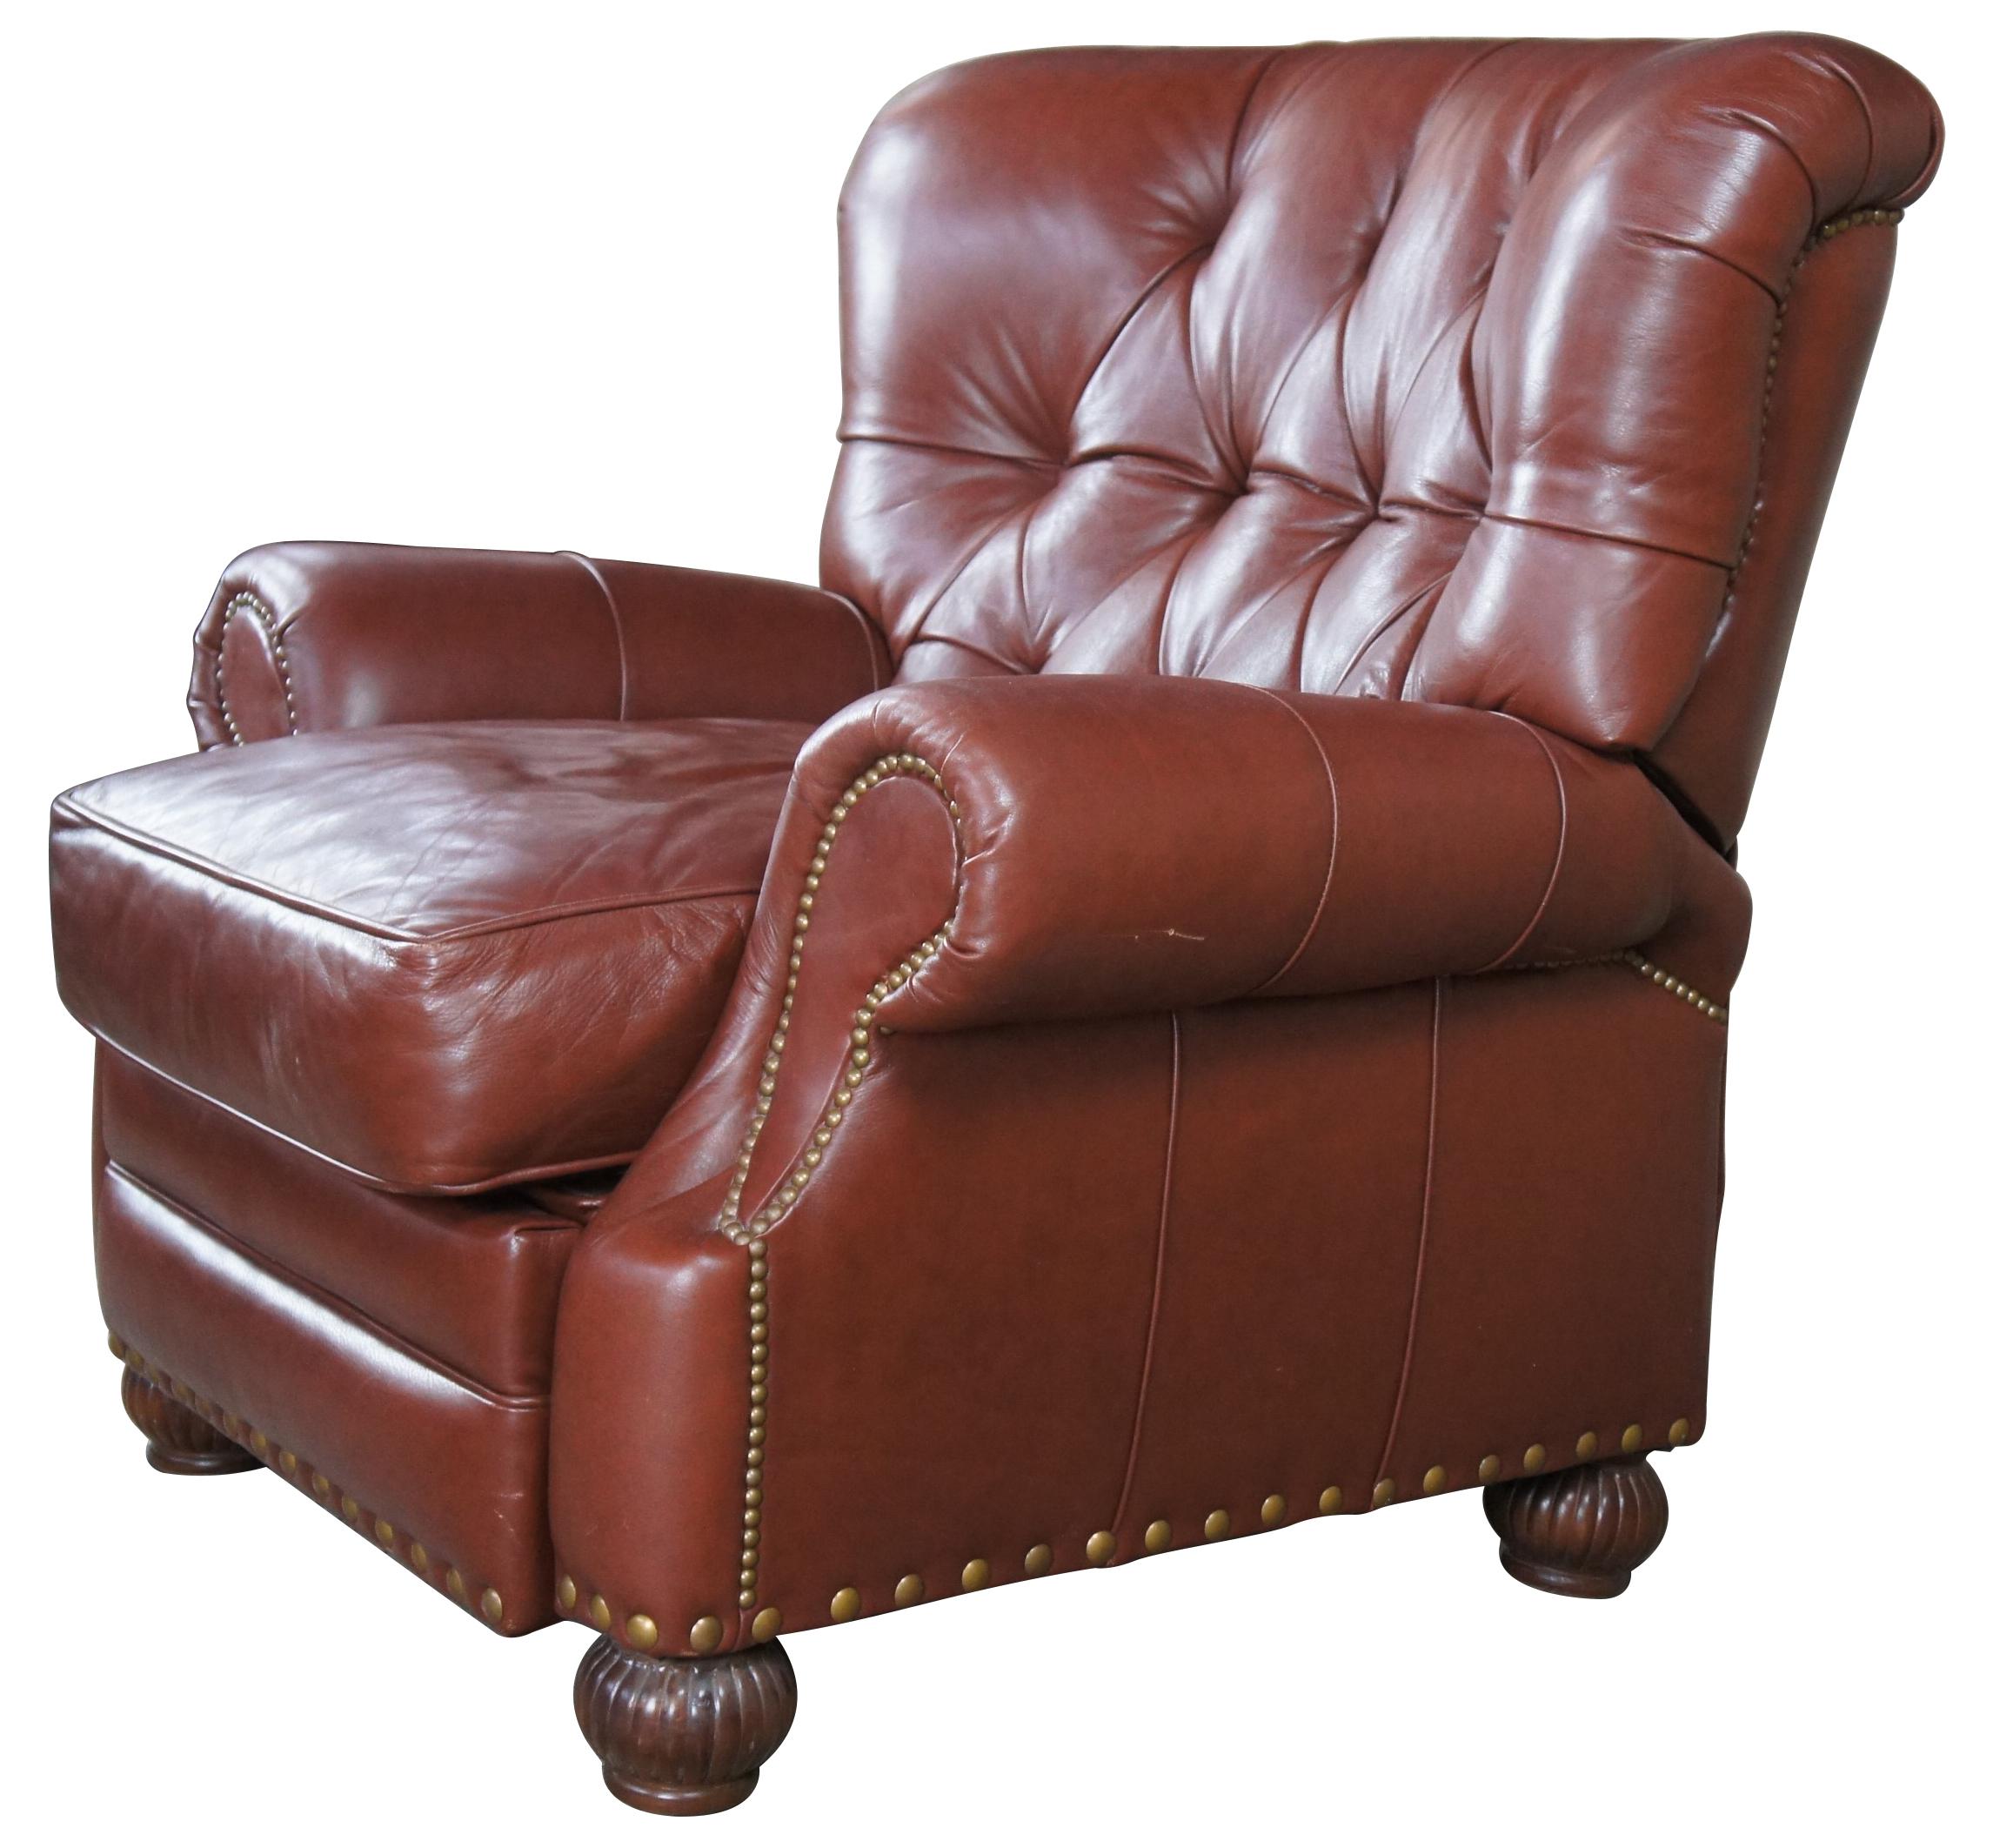 Vintage Leathercraft, Inc Traditional Chesterfield Wingback Recliner.  Features a tufted back of chestnut leather and nailhead trim.  The chair is supported by ribbed bun feet.  #89379-050, upholstery Sarato Chestnut, 26-916.

Leathercraft Inc is